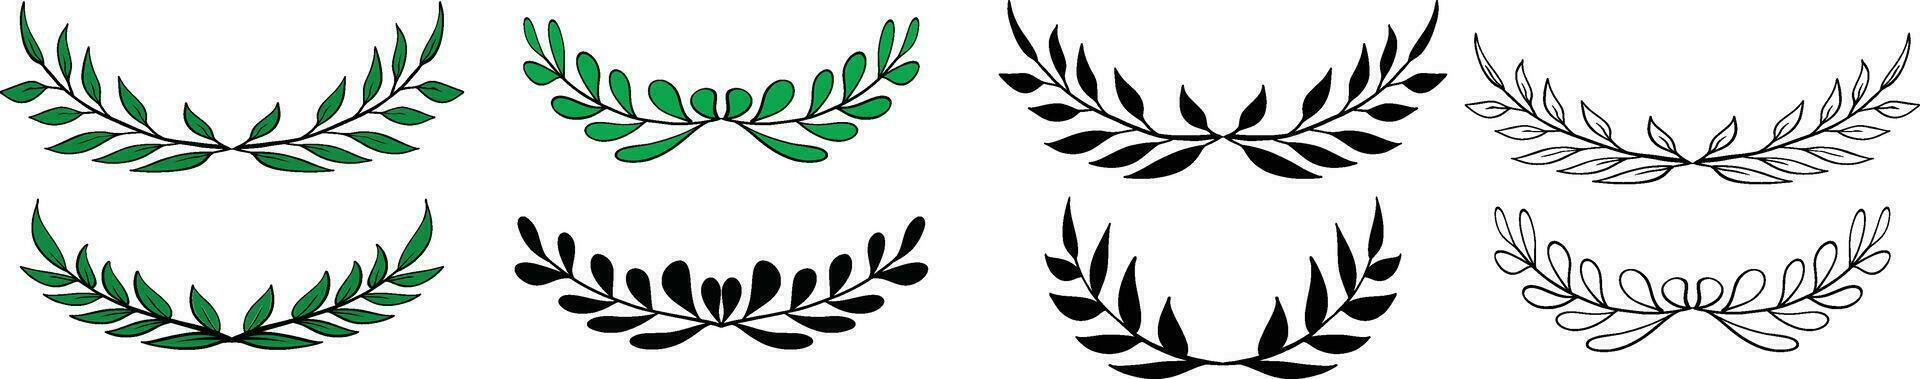 Set of wreaths and branches with leaves vector  illustrations